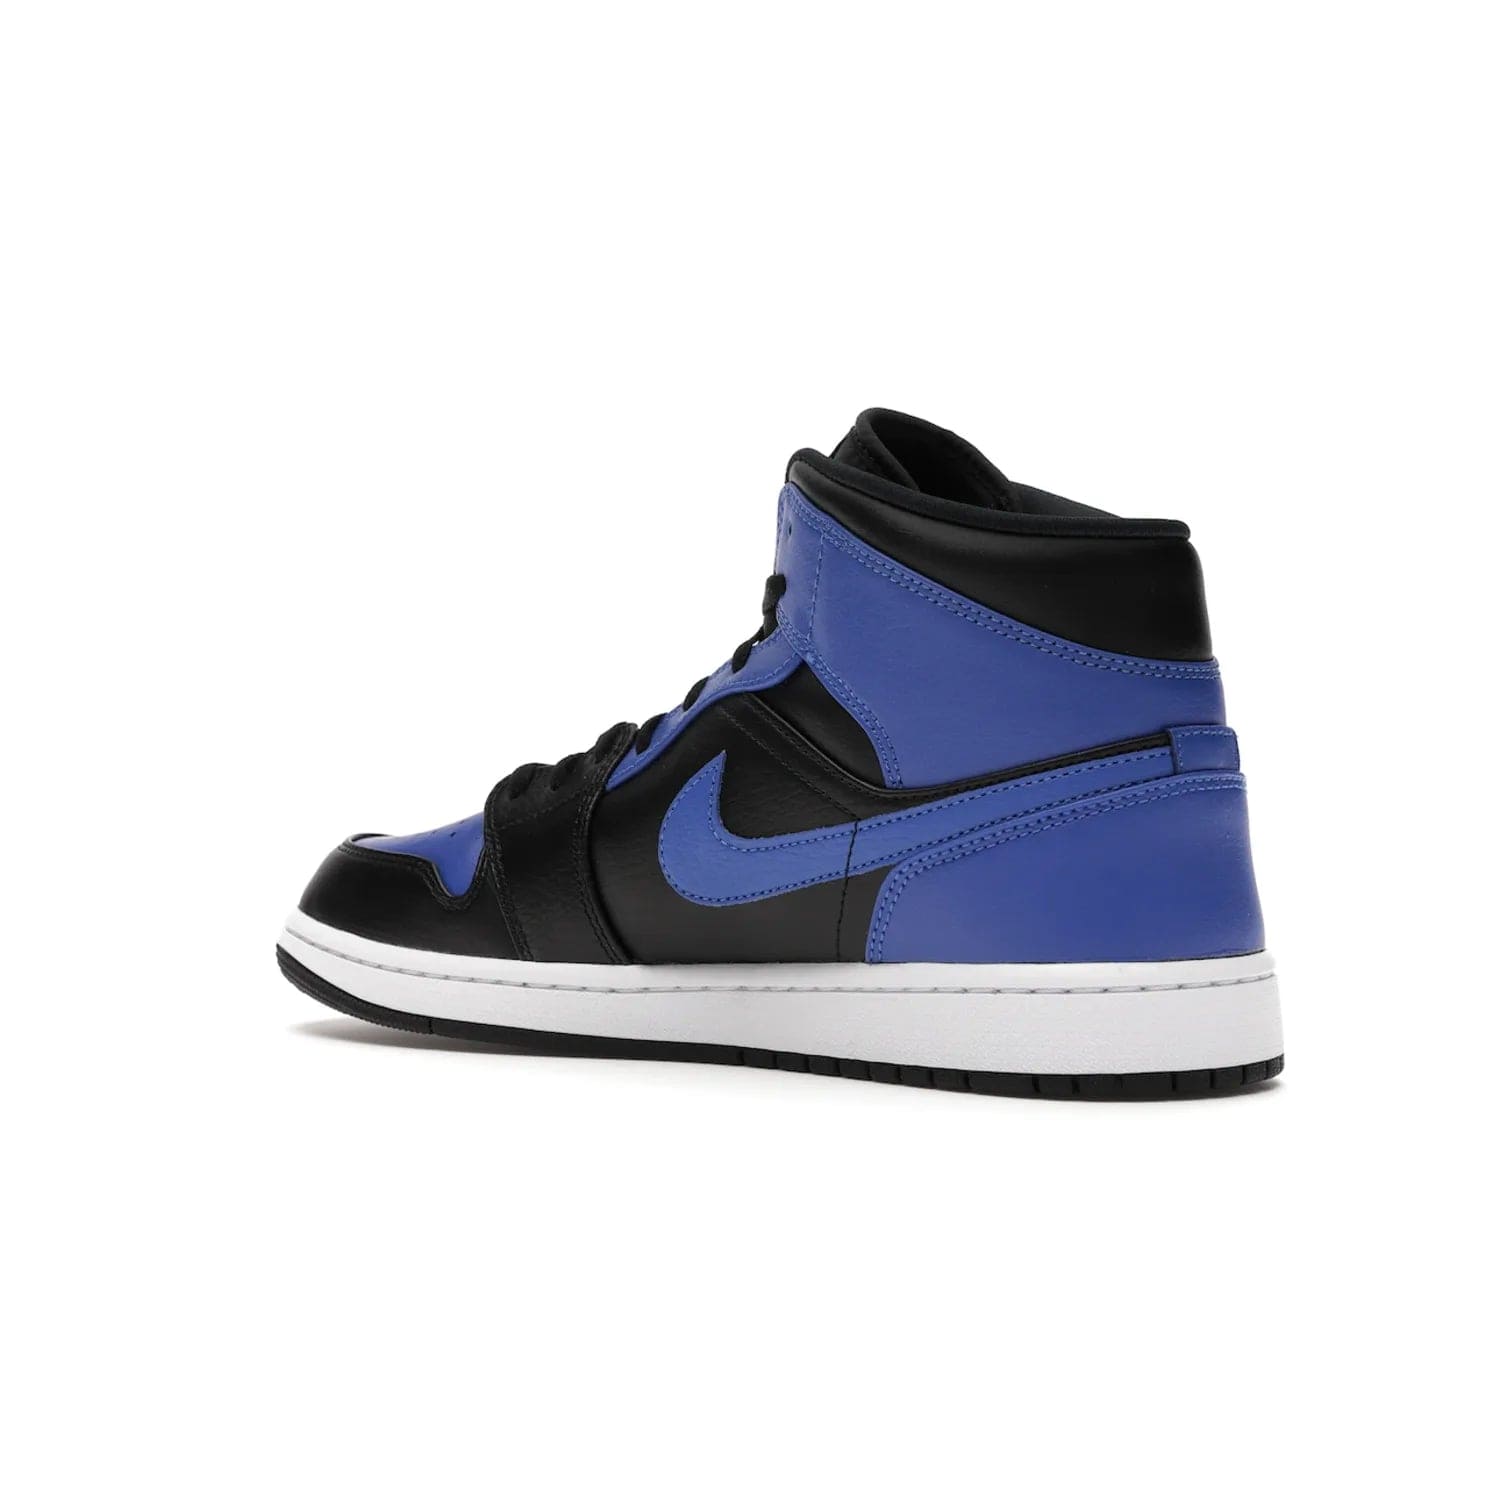 Jordan 1 Mid Hyper Royal Tumbled Leather - Image 23 - Only at www.BallersClubKickz.com - Iconic colorway of the Air Jordan 1 Mid Black Royal Tumbled Leather. Features a black tumbled leather upper, royal blue leather overlays, white midsole & black rubber outsole. Released December 2020. Adds premium style to any collection.